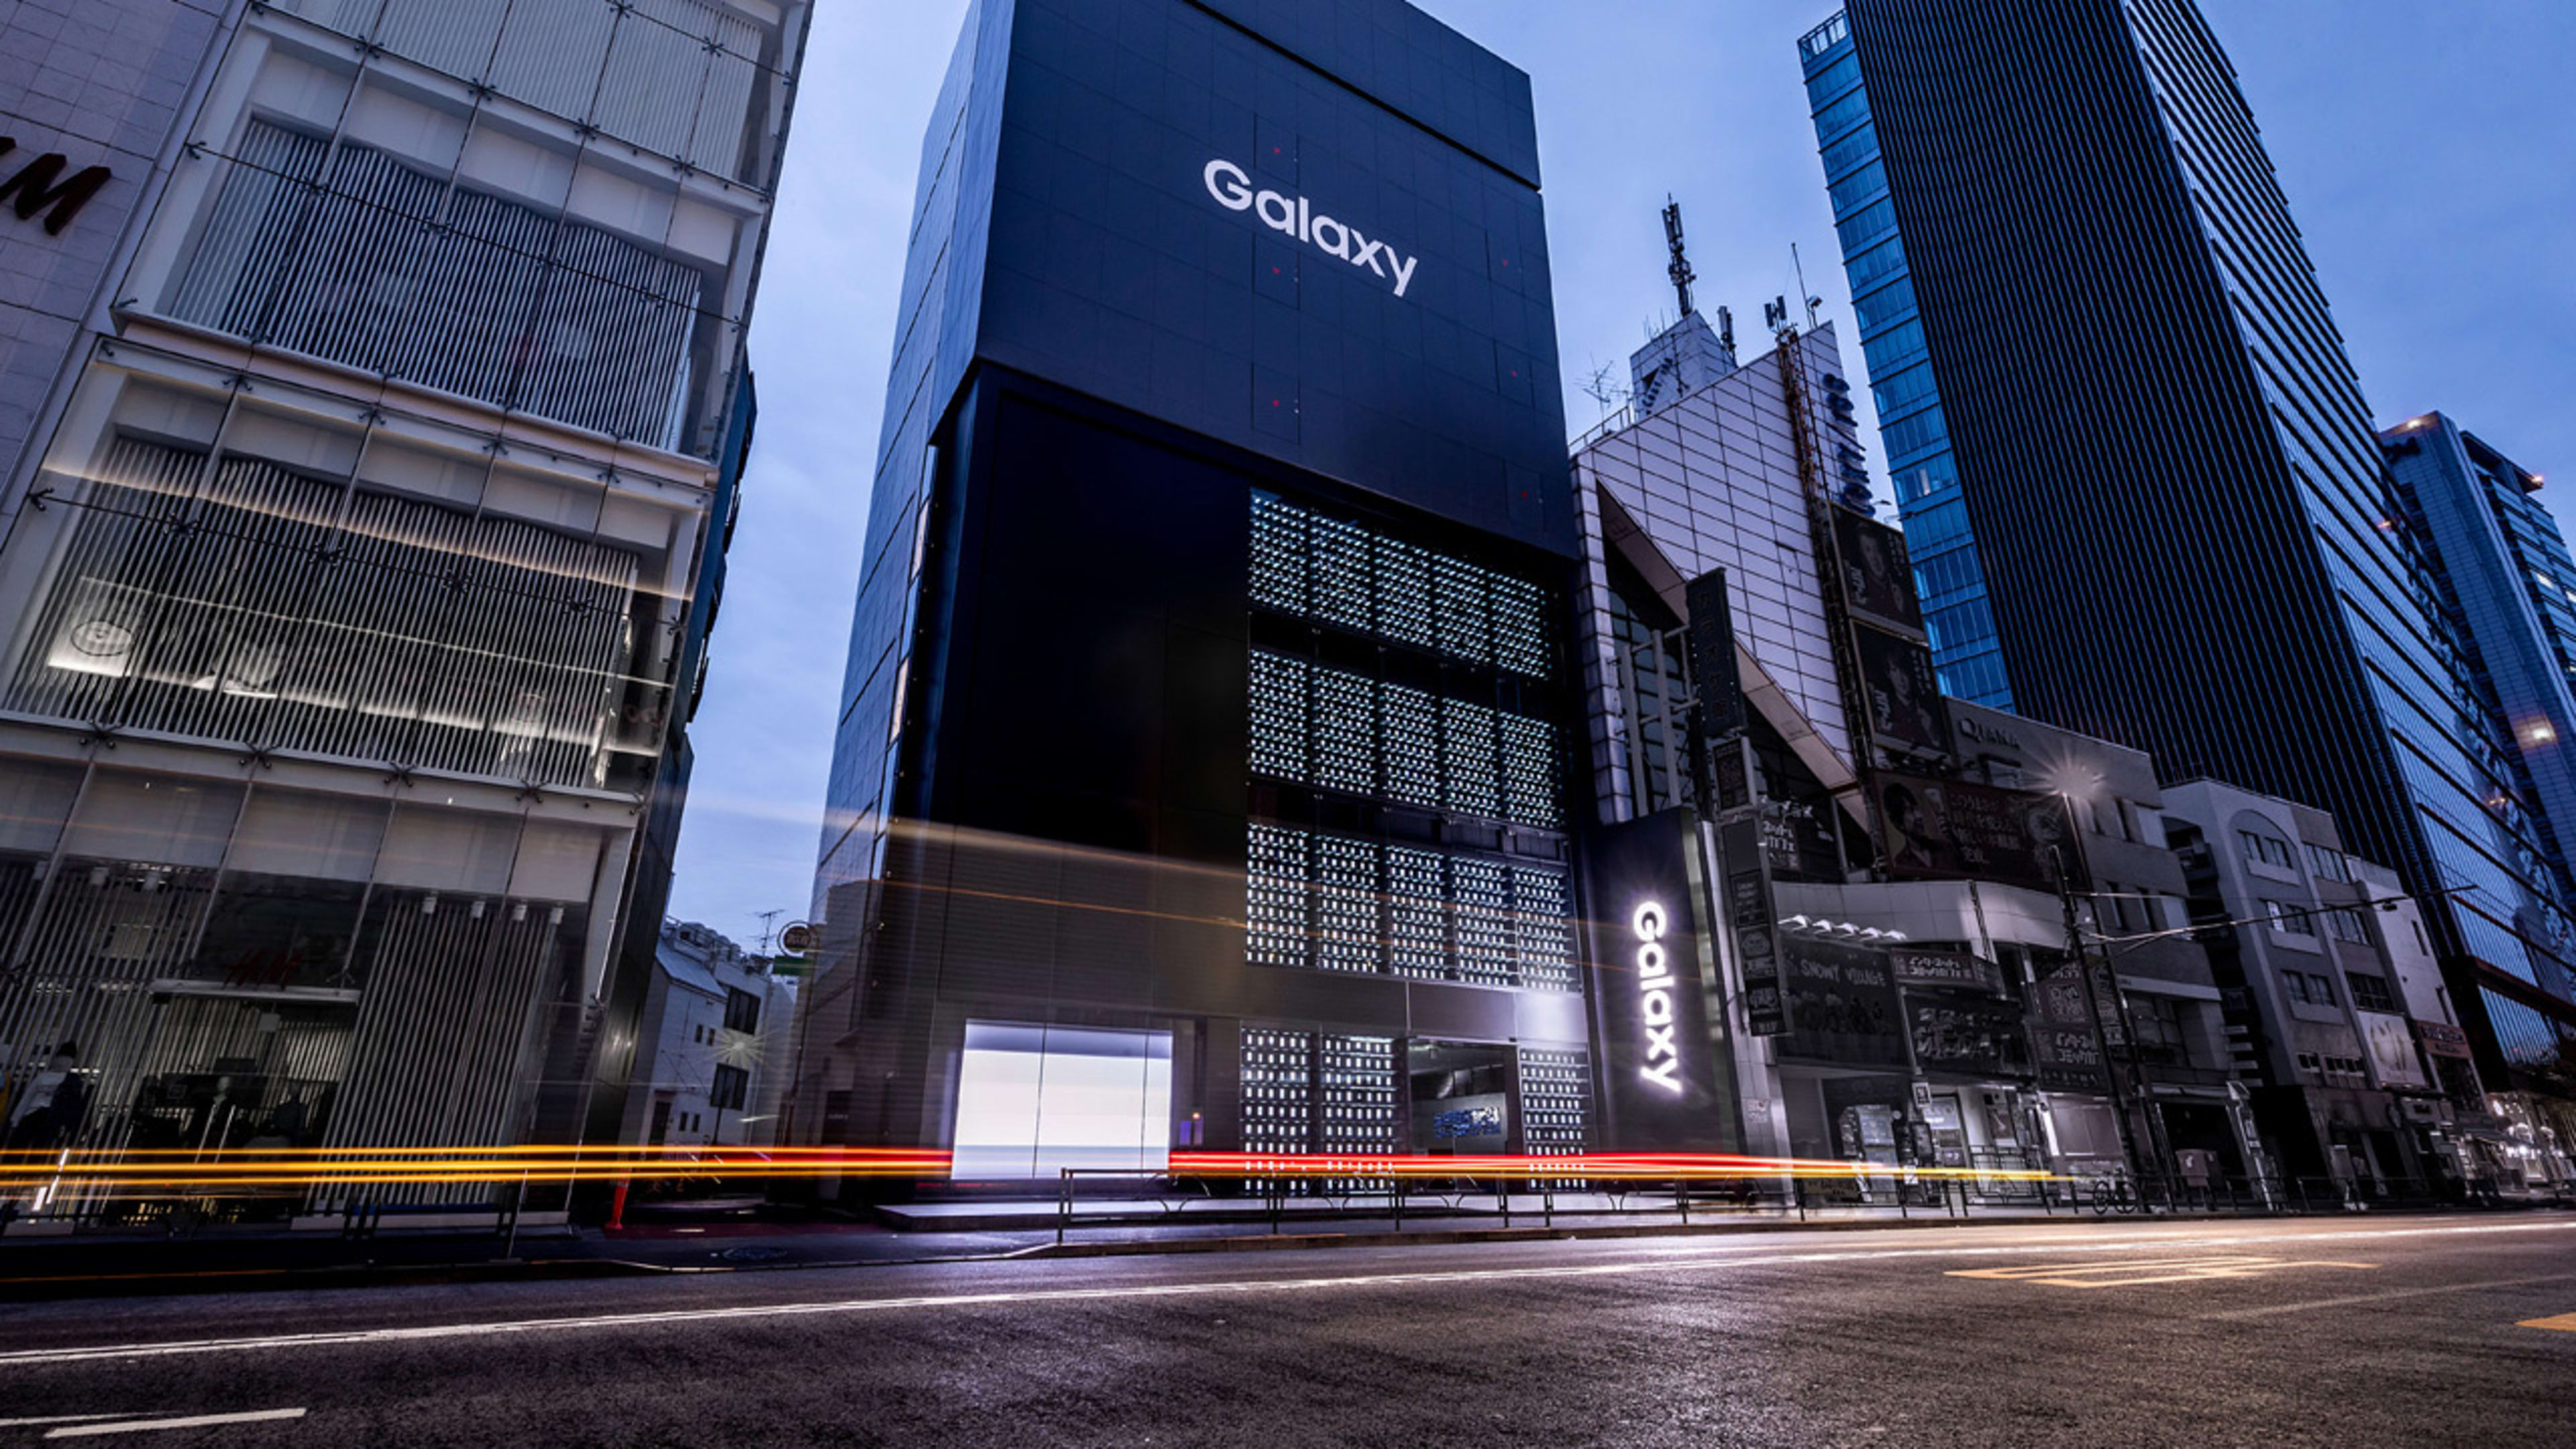 This gorgeous facade is made of 1,000 Samsung Galaxy phones